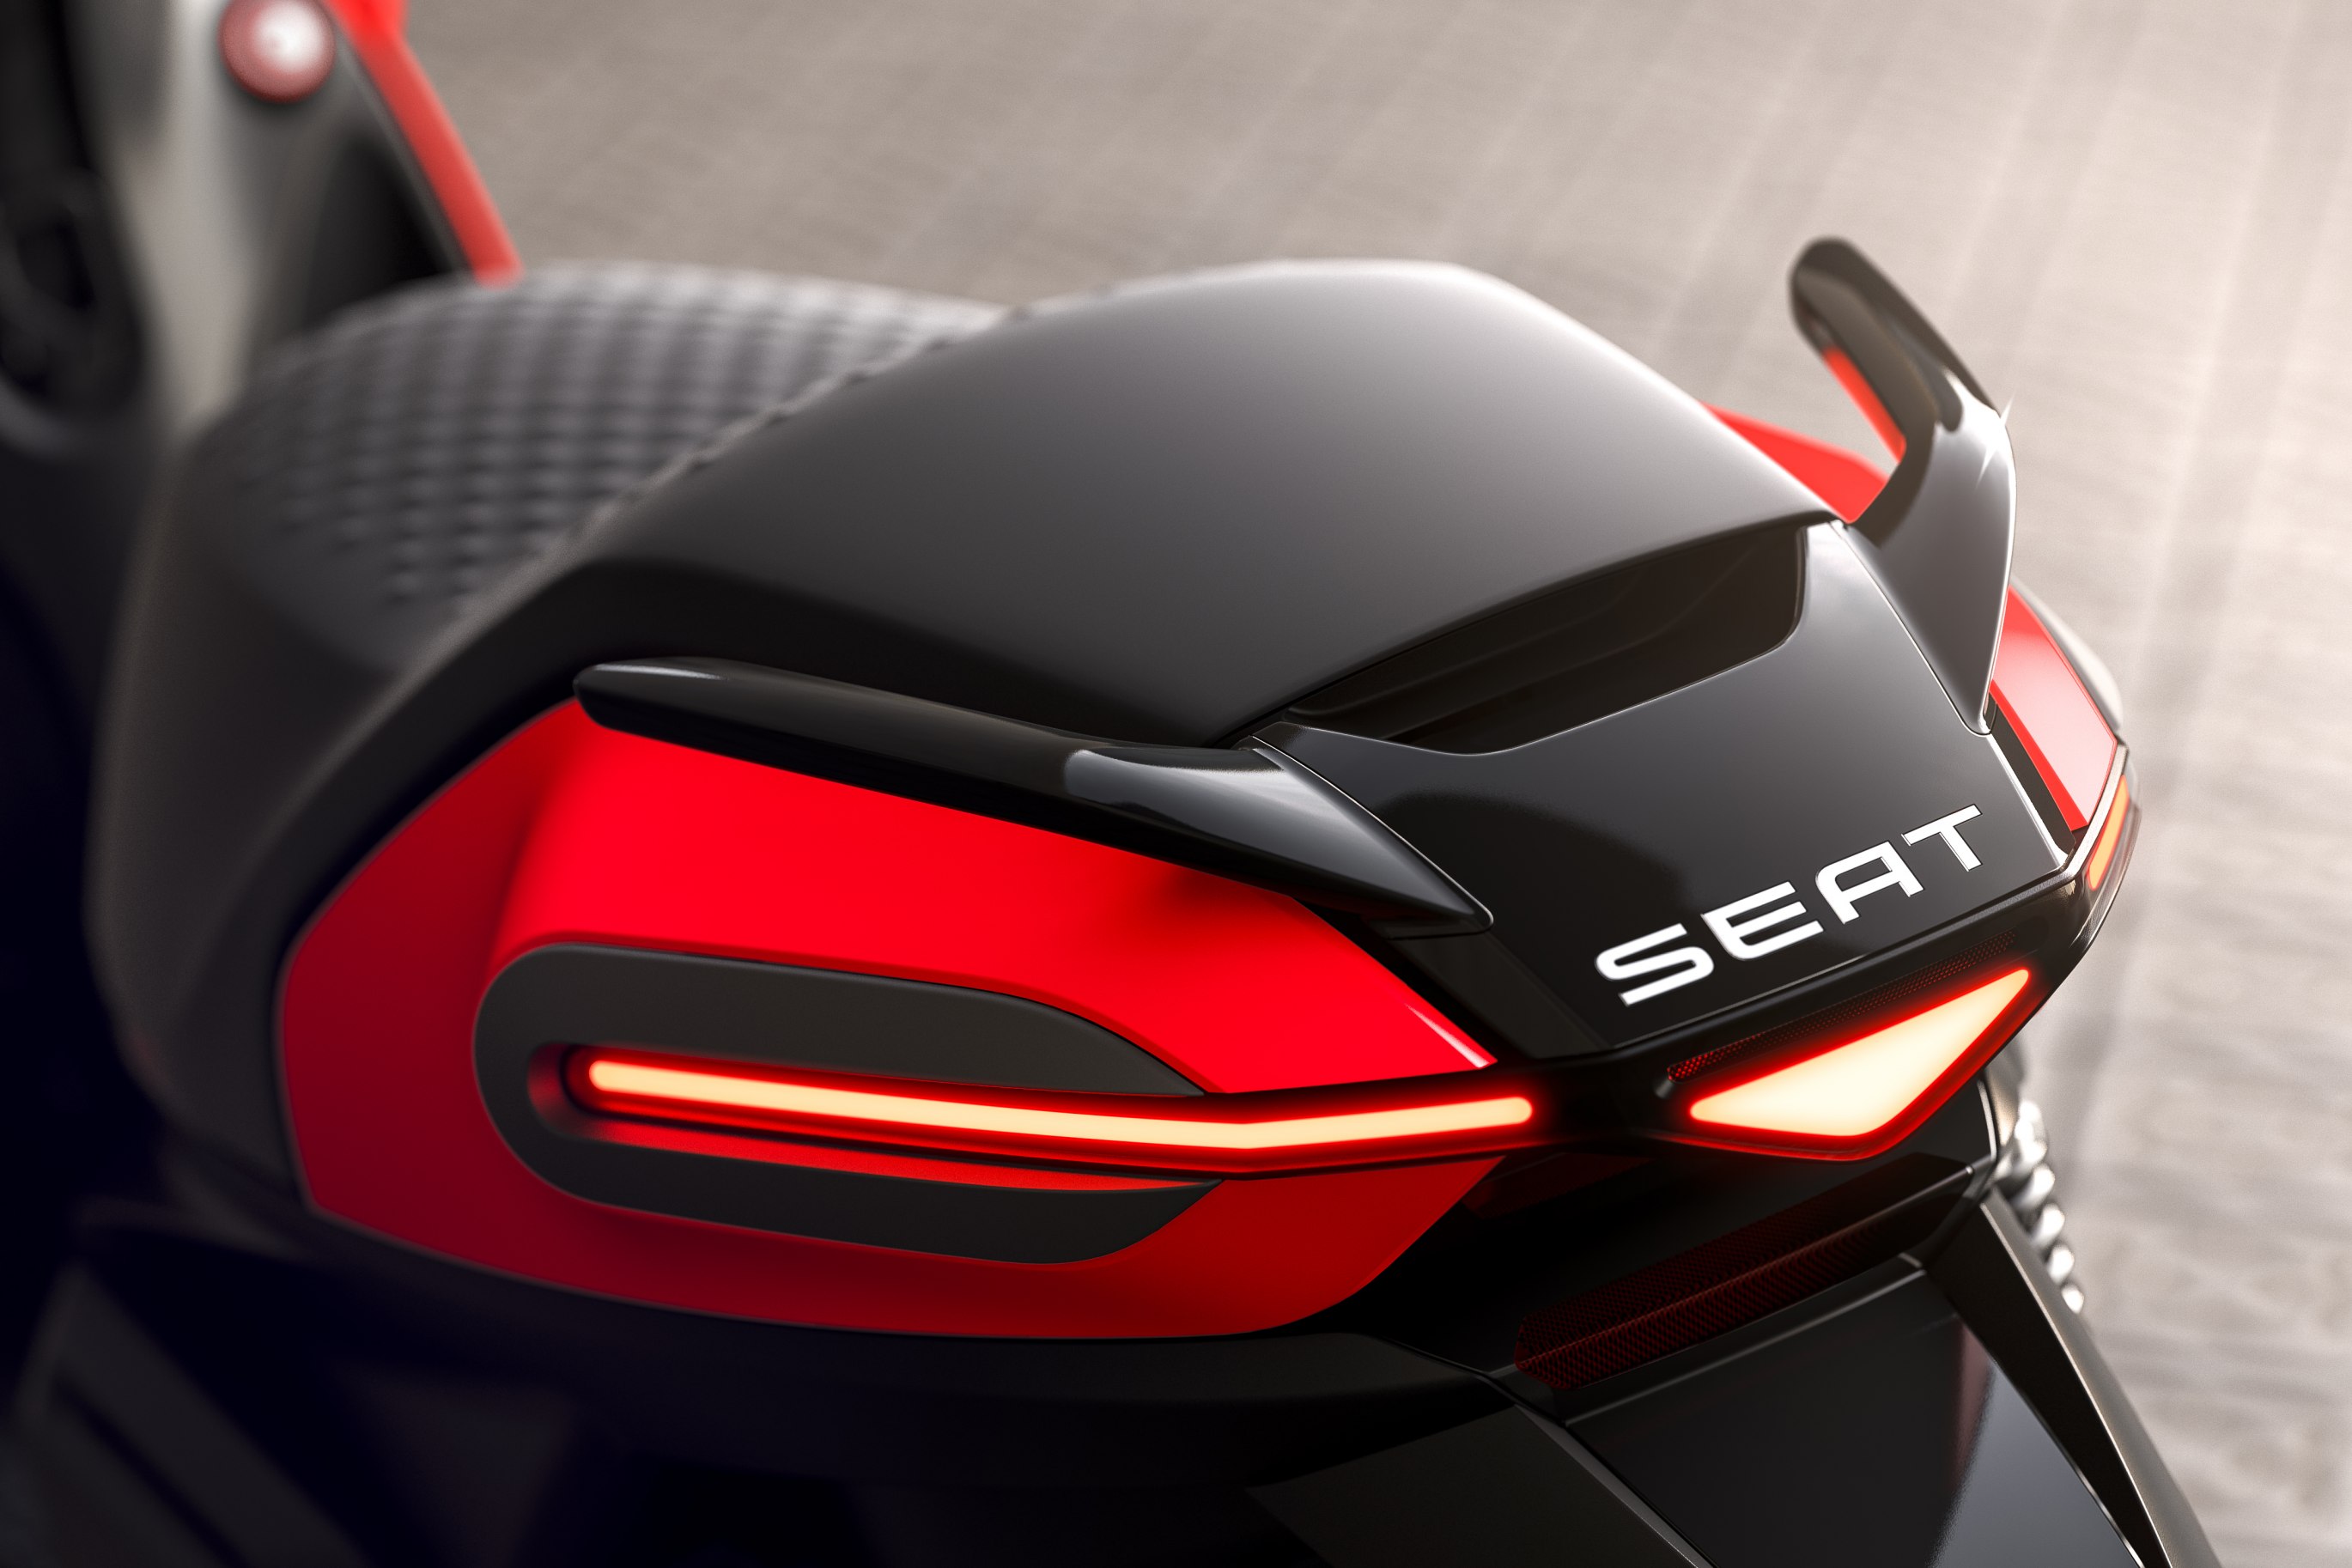 seat-will-break-into-the-motorcycle-market-with-a-fully-electric-escooter_01_hq.jpg